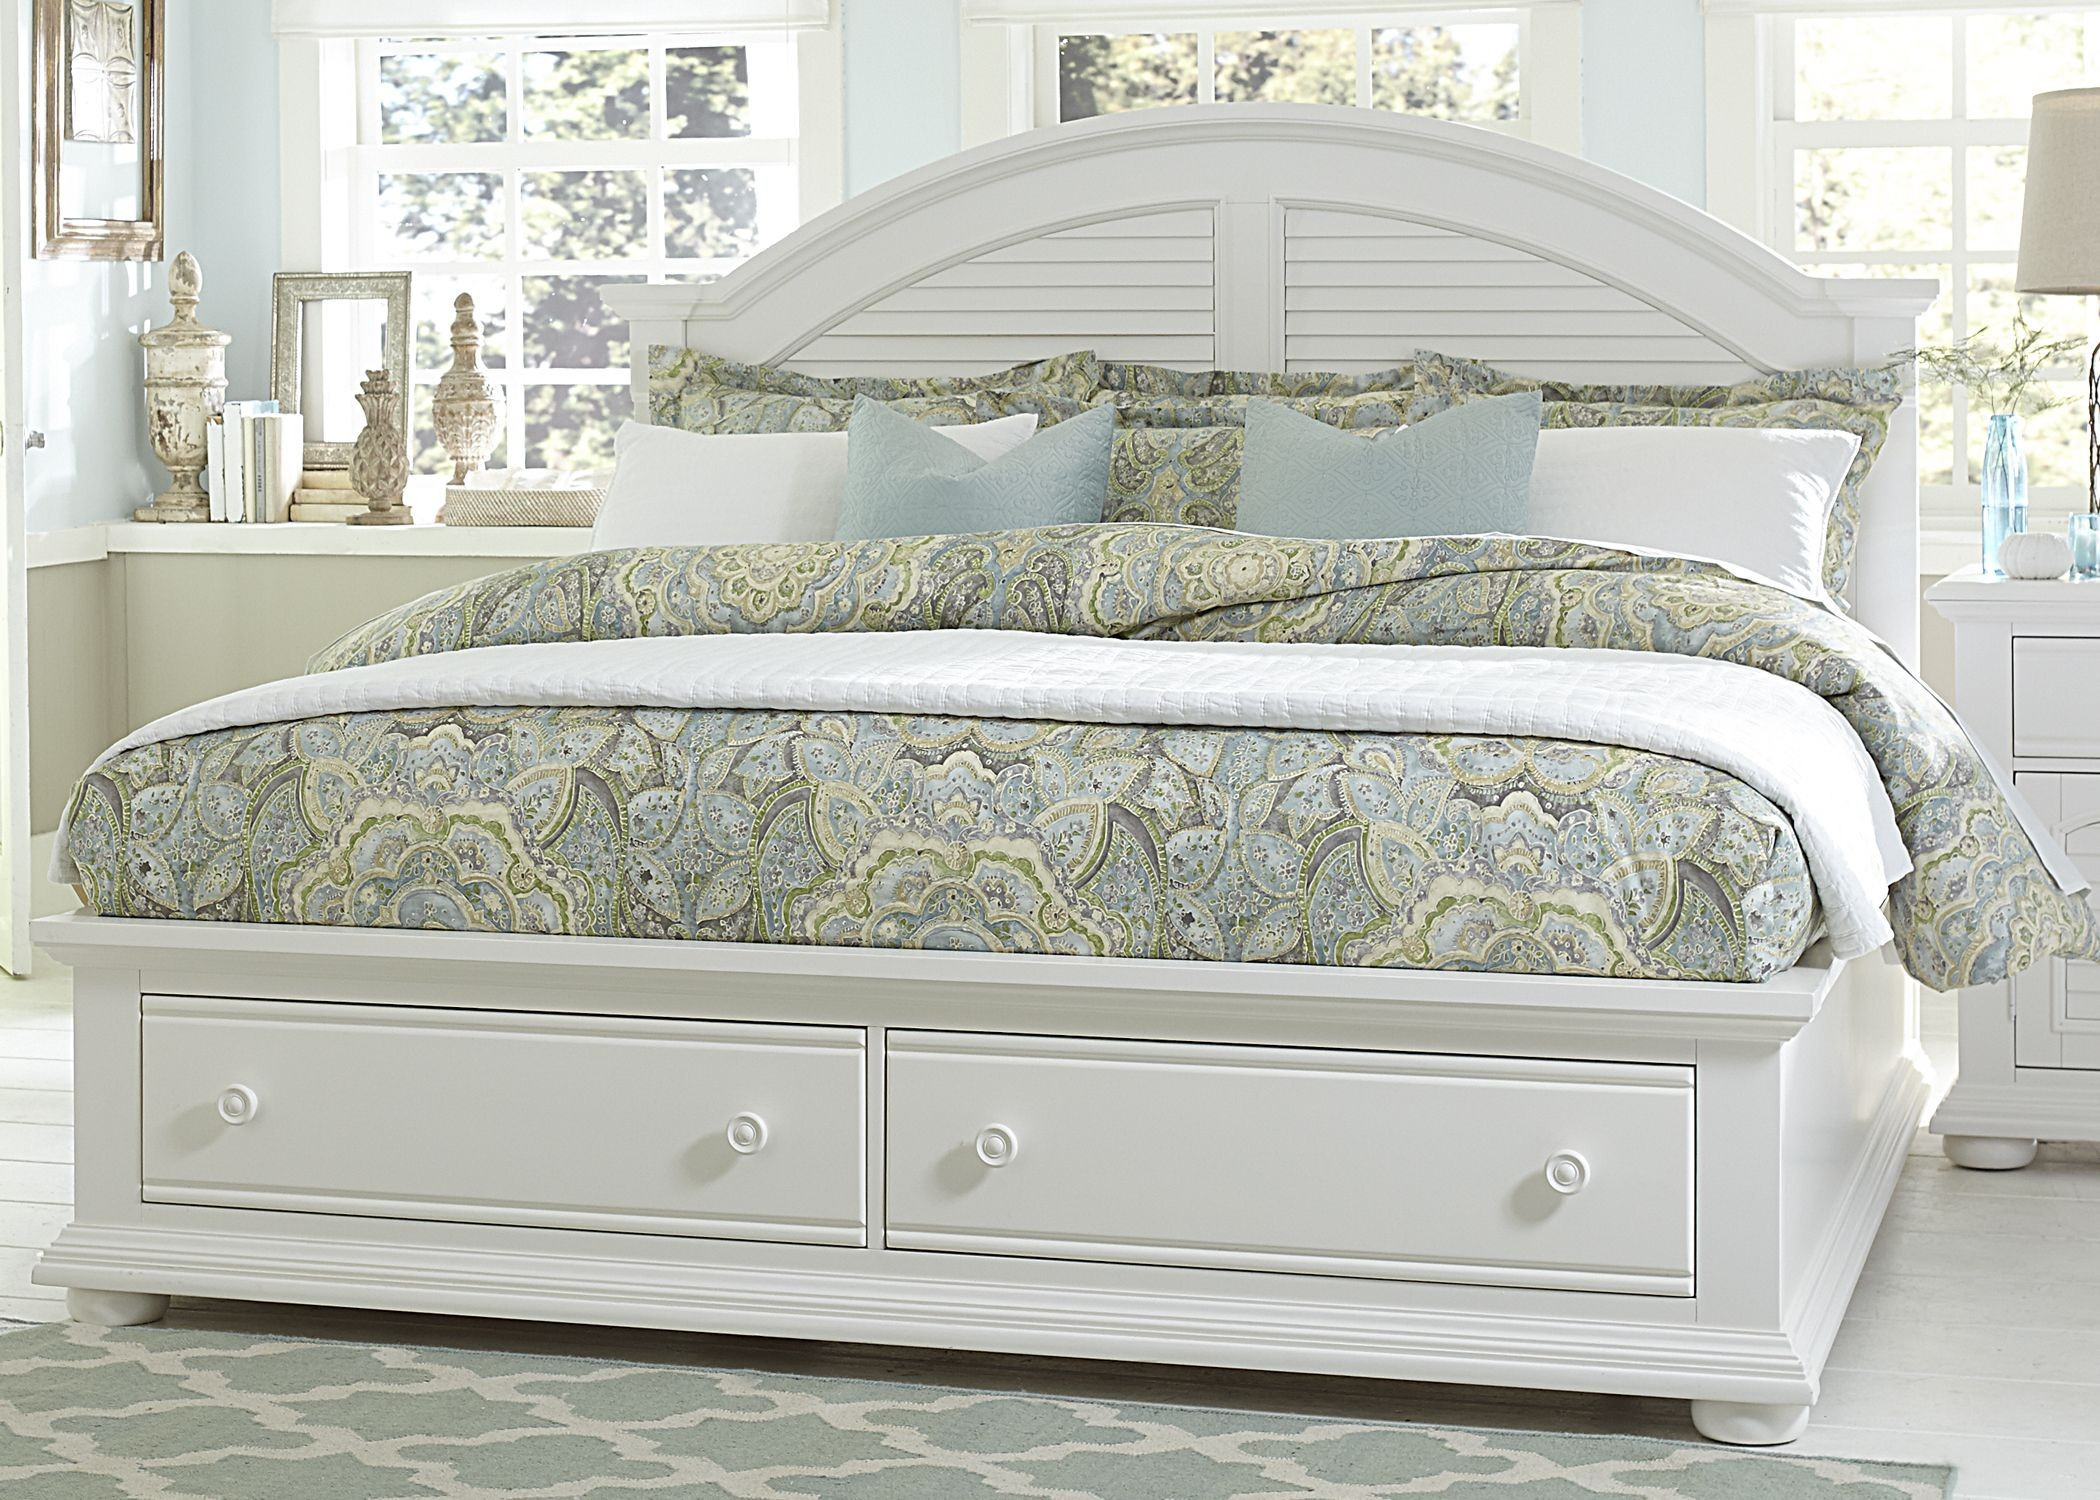 King Size Storage Bedroom Set
 Summer House Oyster White King Panel Storage Bed from